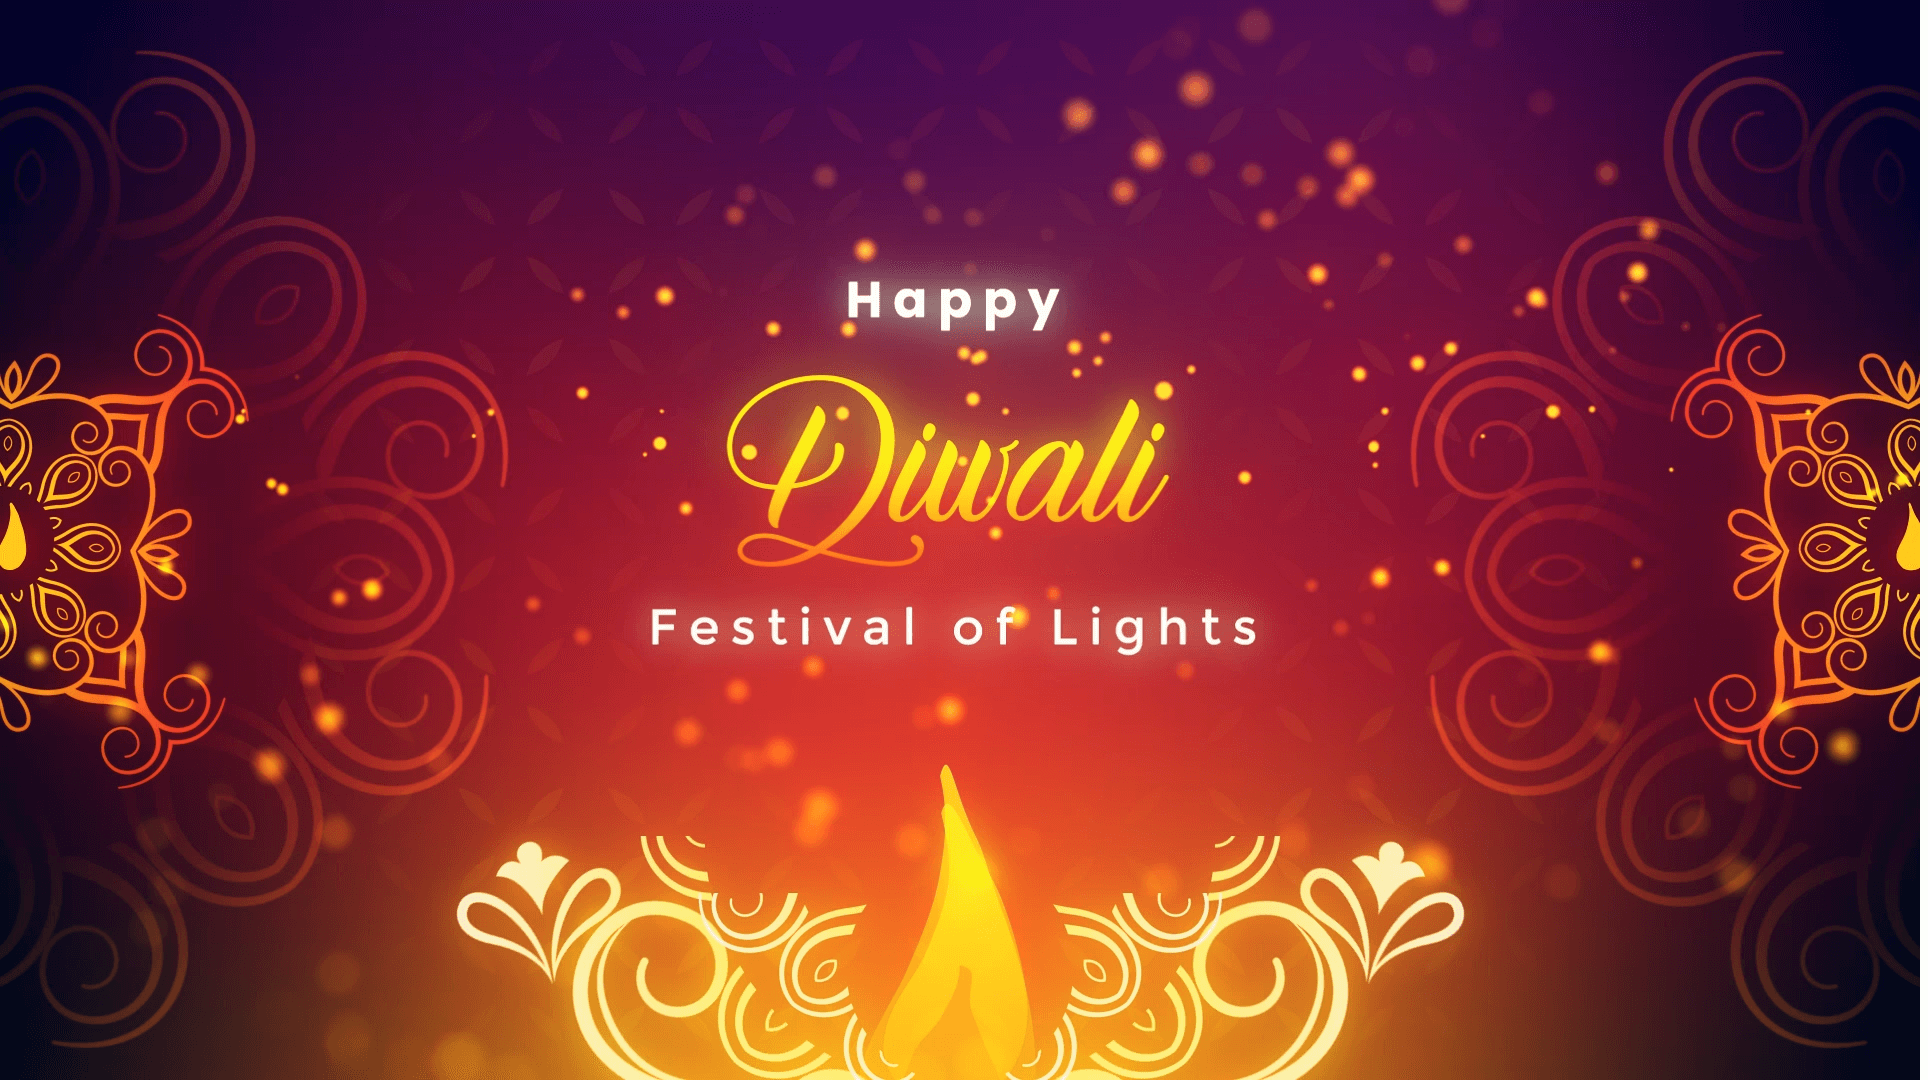 happy diwali after effects template free download